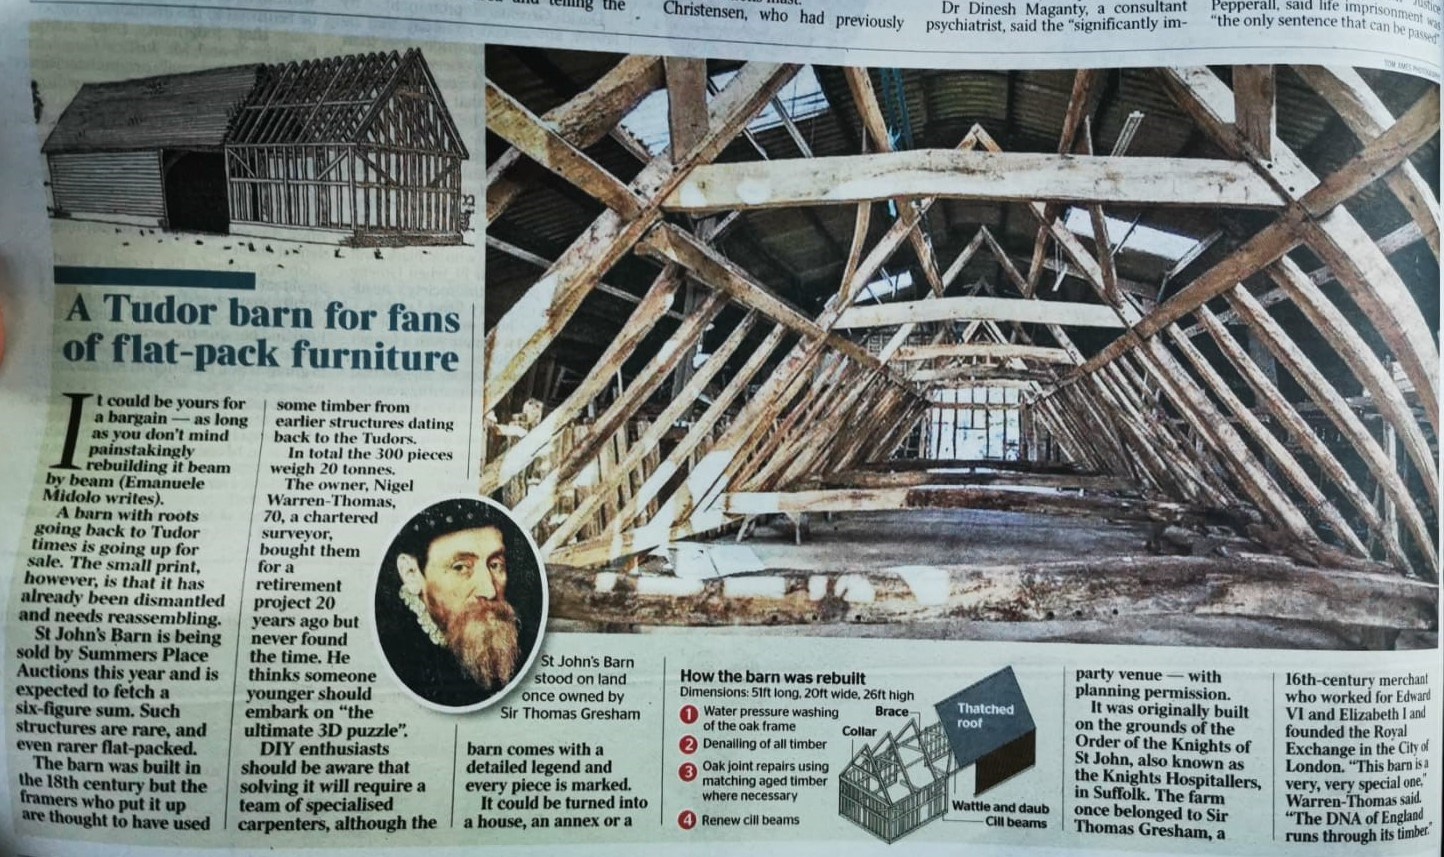 Summers Place Auctions to sell the ultimate 3D Puzzle - St John's Barn